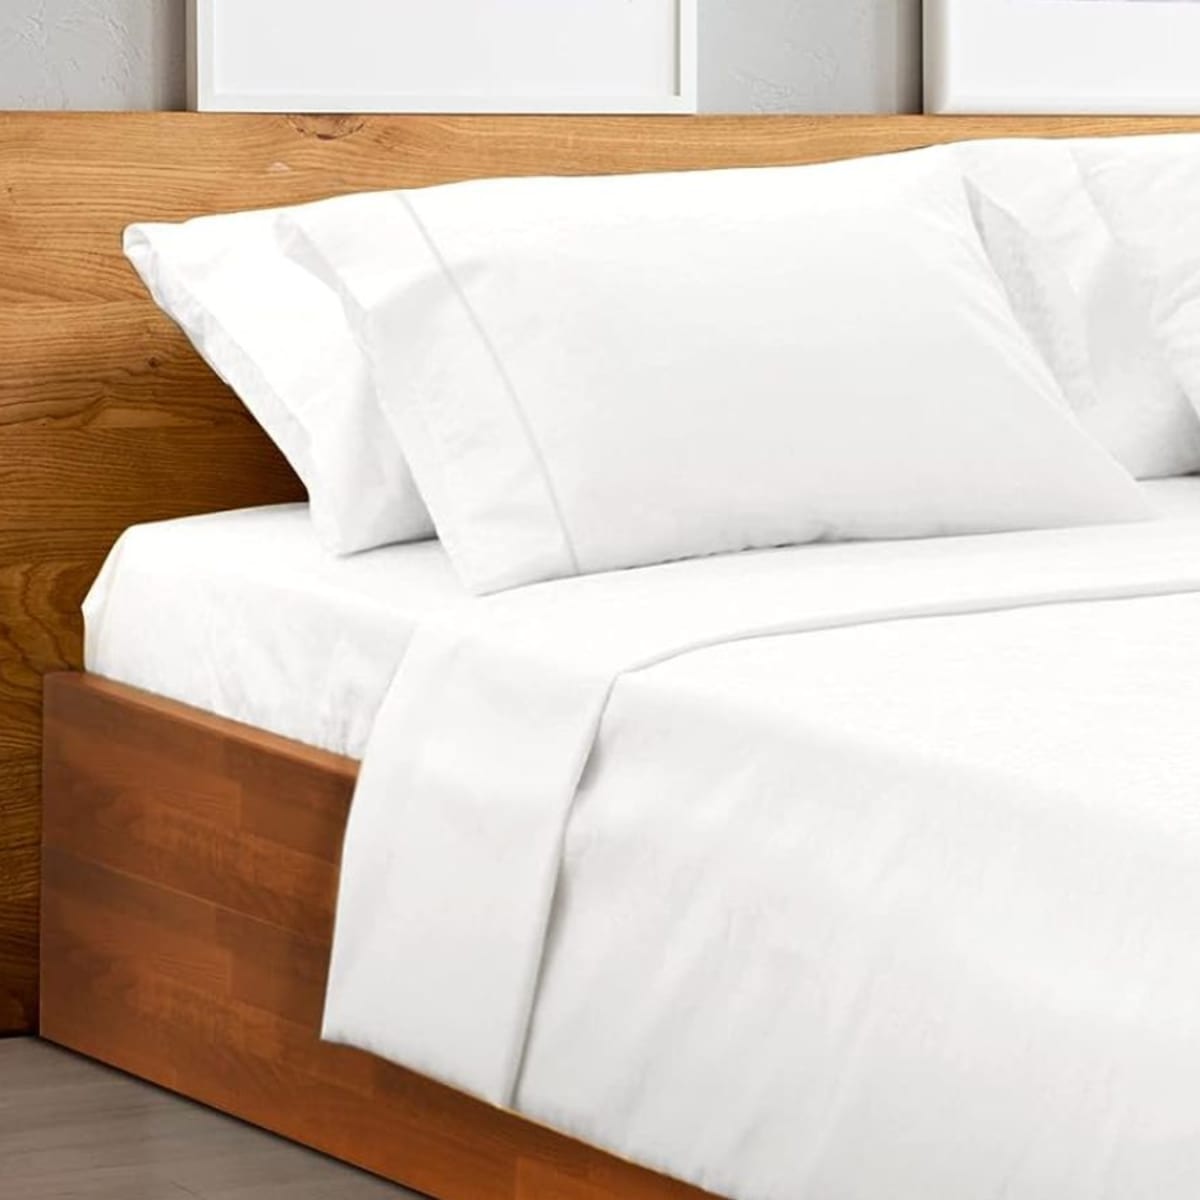 s top-selling LuxClub bed sheets are nearly 50% off - TheStreet